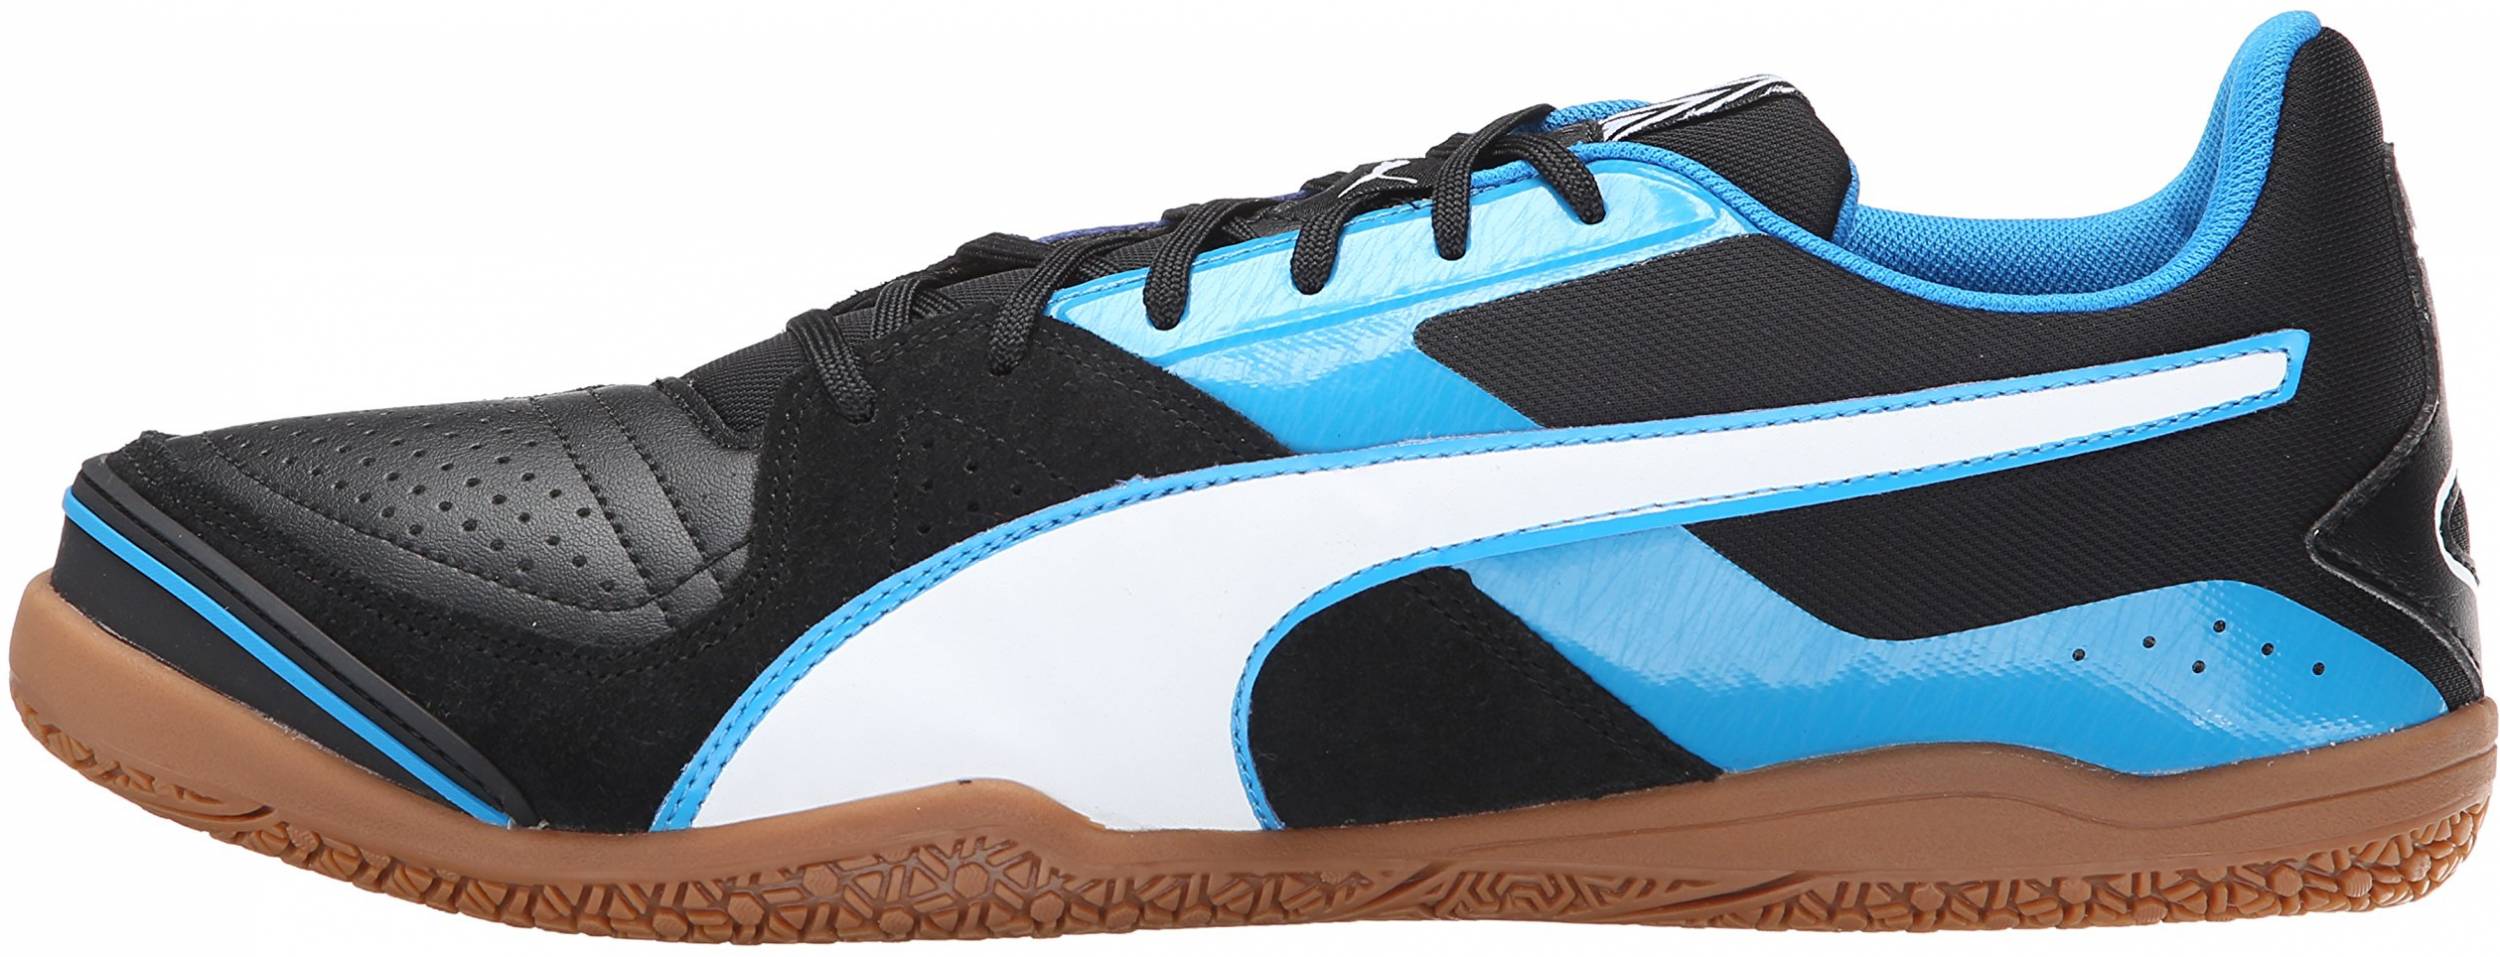 Only $48 + Review of Puma Invicto Sala Indoor | RunRepeat